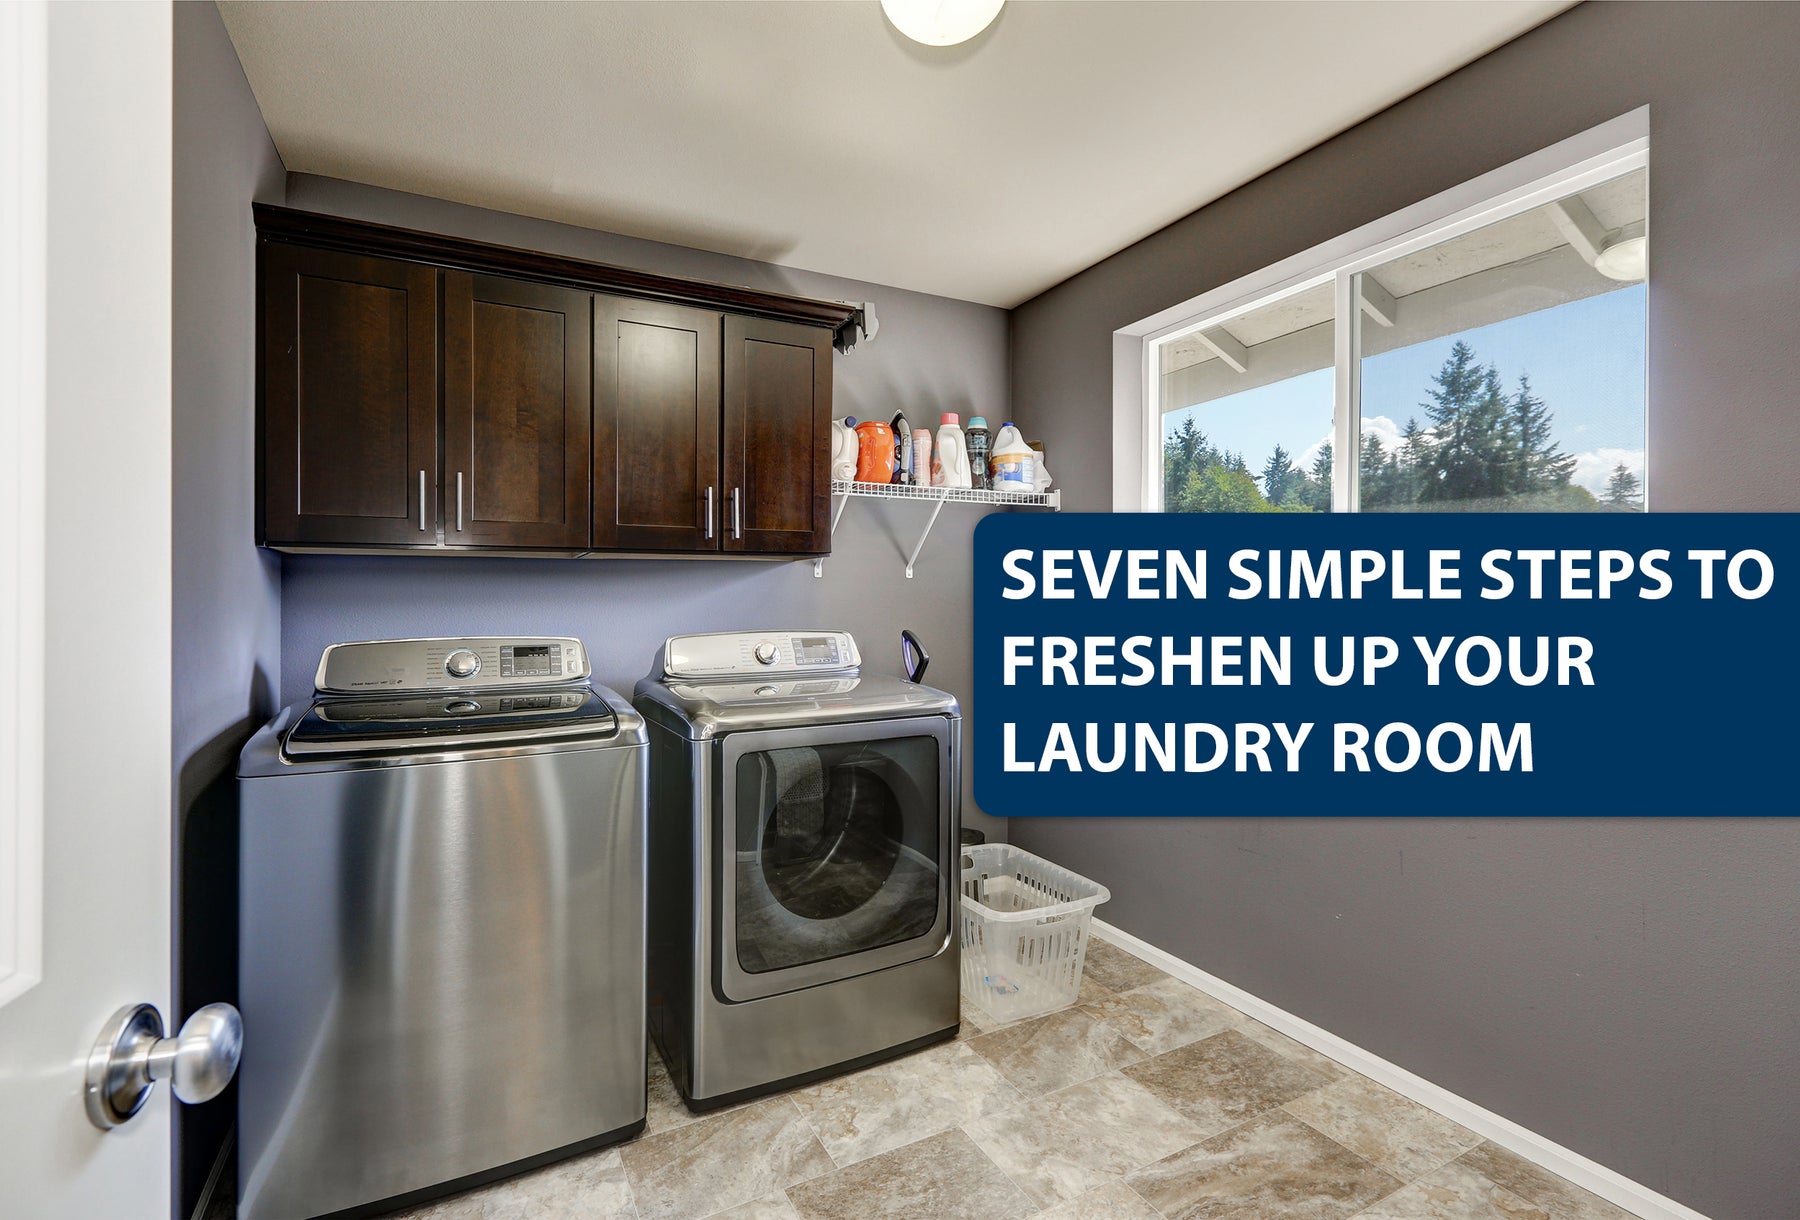 Seven Simple Steps to Freshen up Your Laundry Room